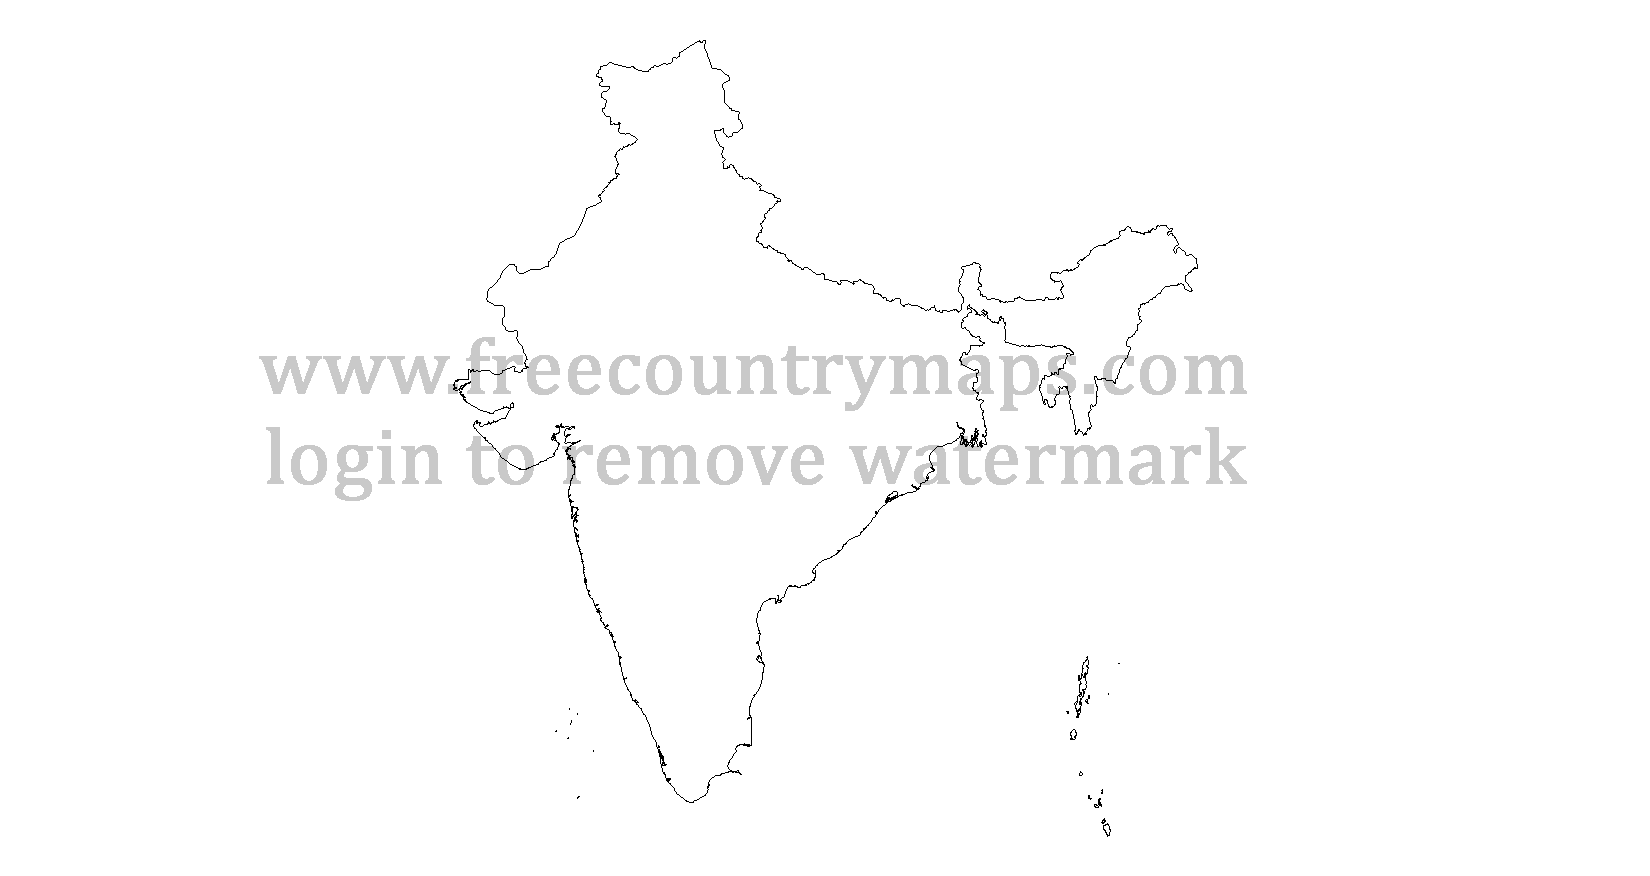 India Outline Map : Mercator